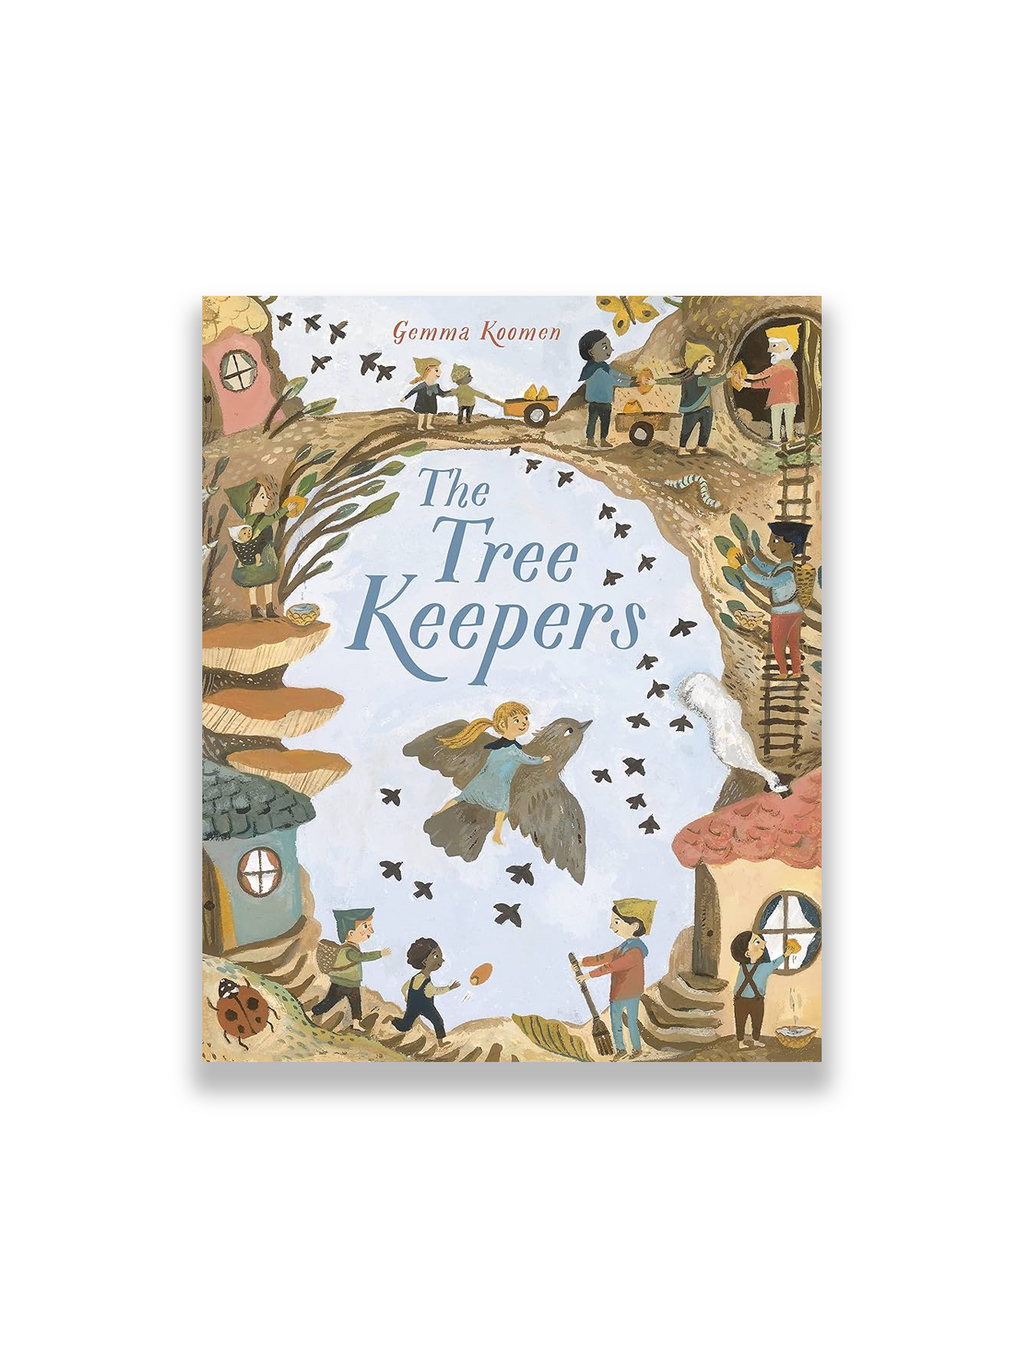 The Tree Keepers